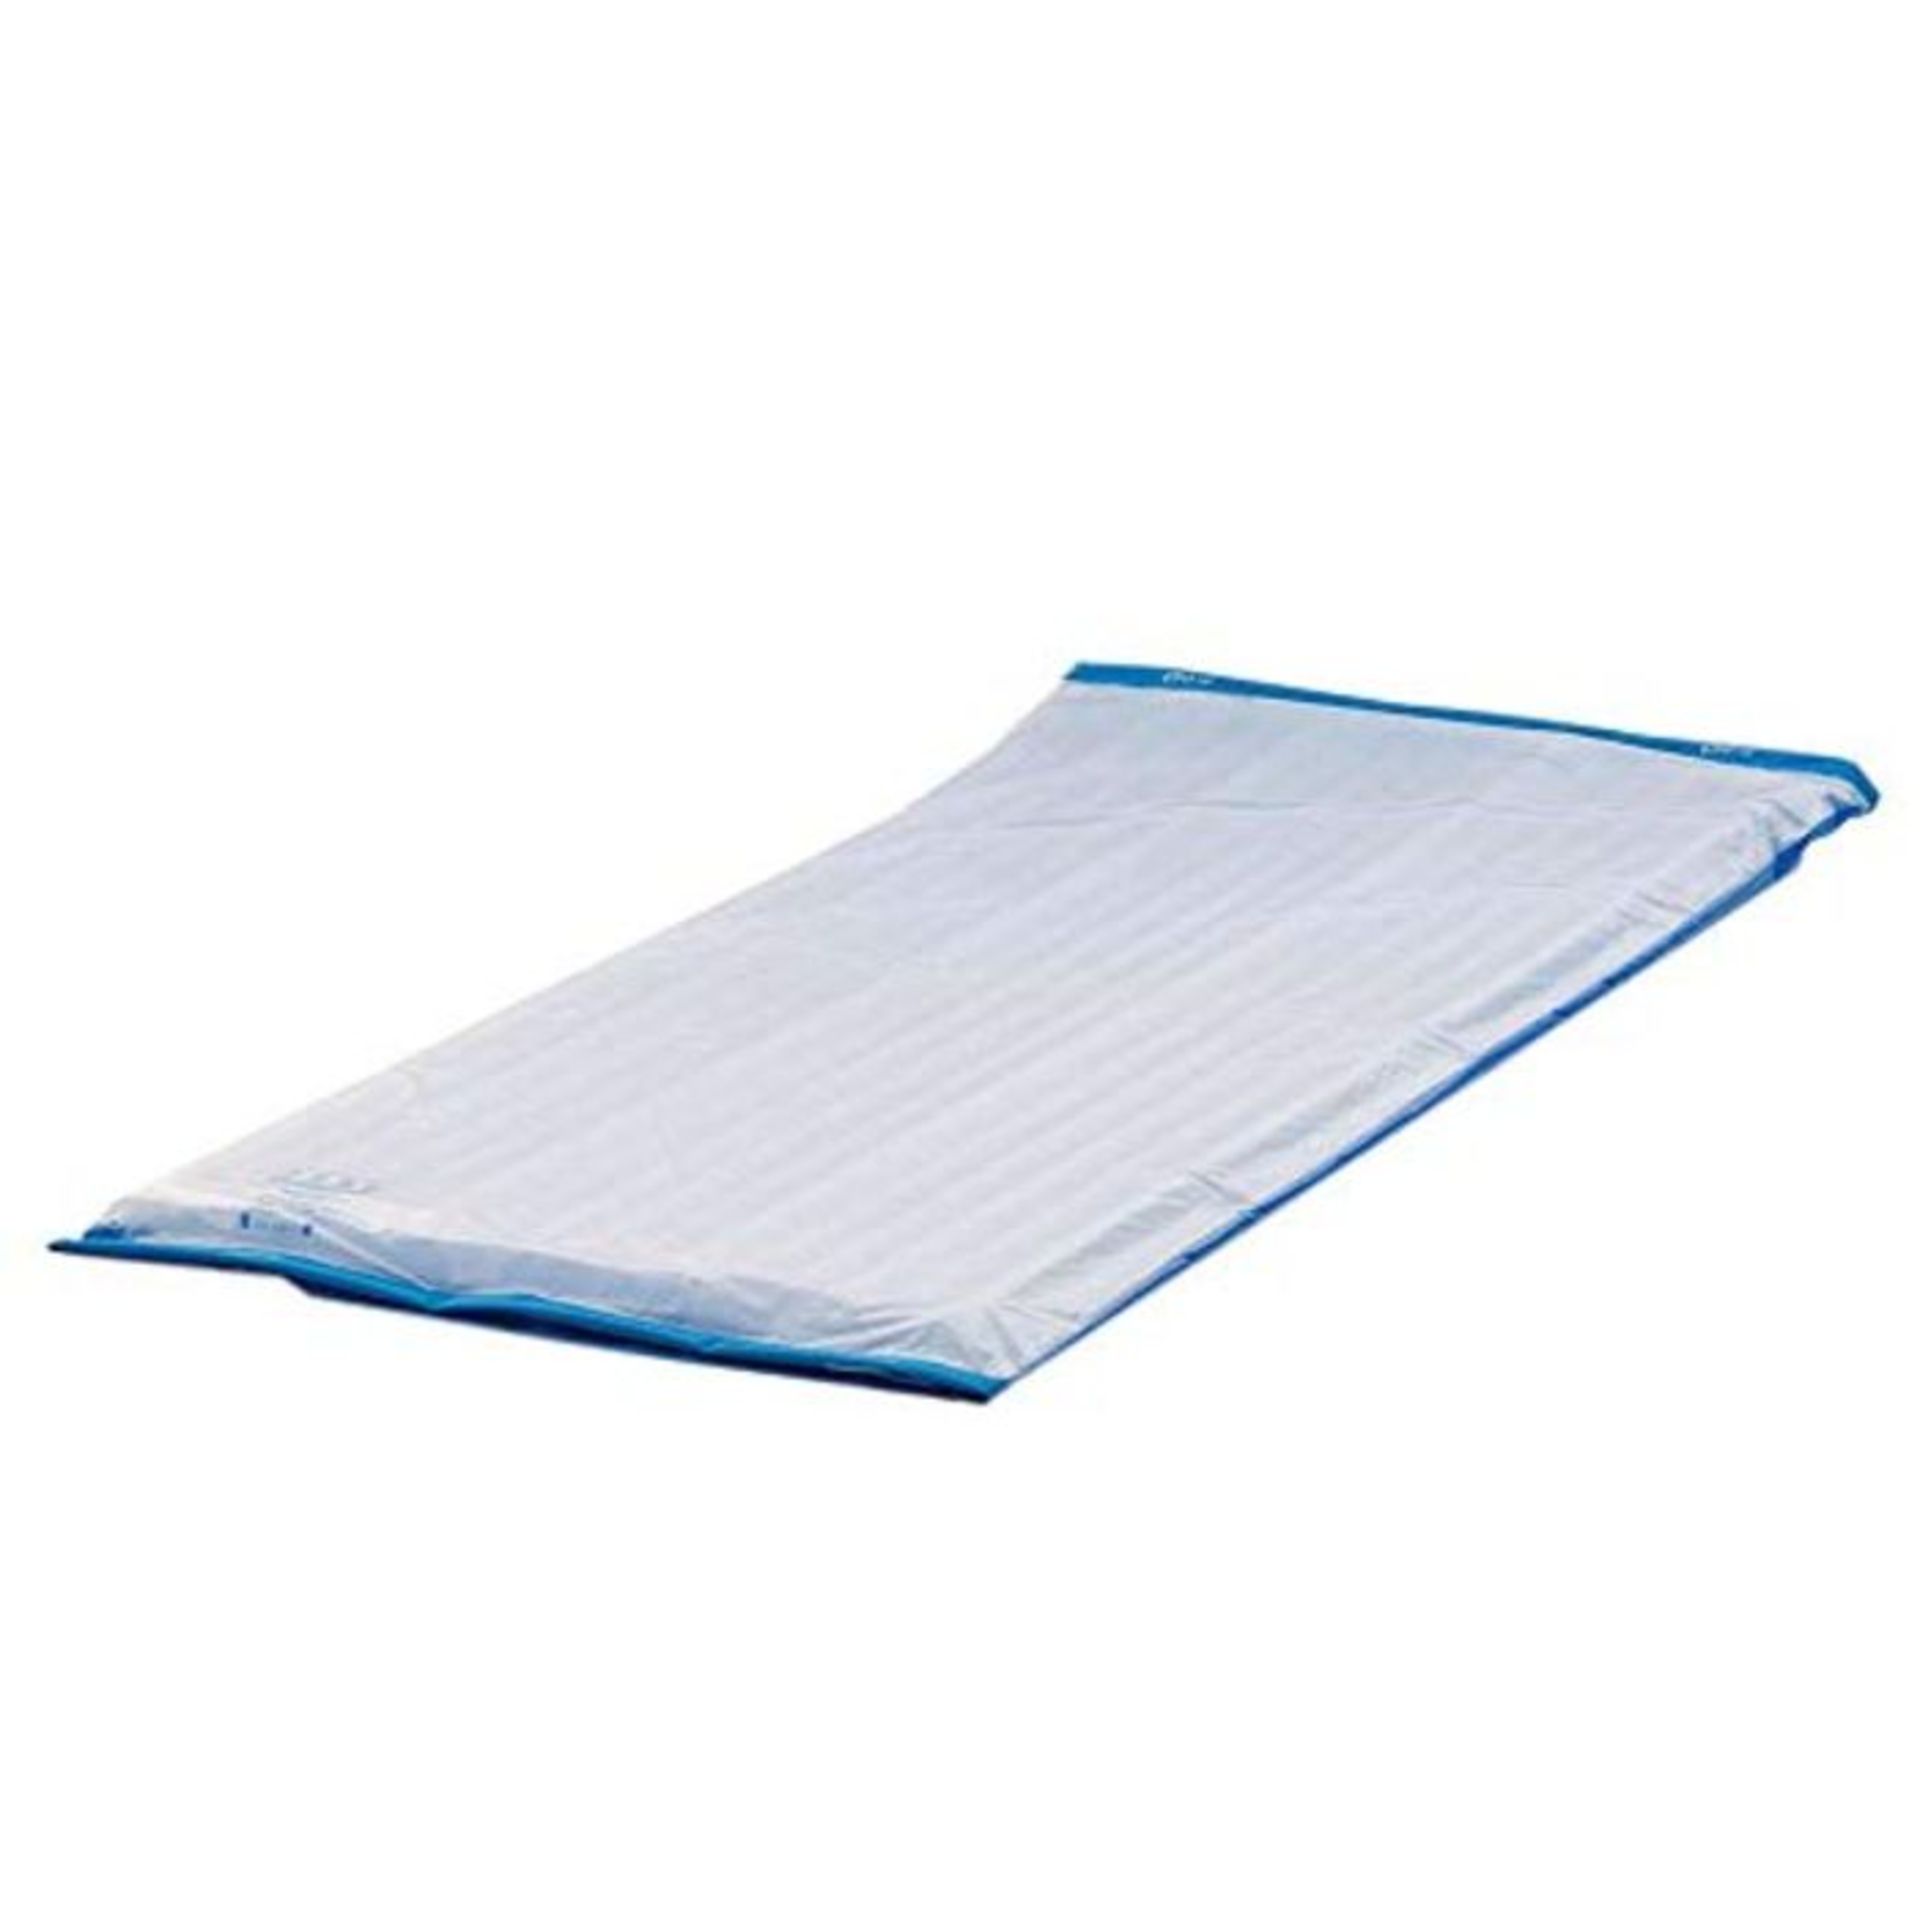 RRP £107.00 NRS Healthcare Repose Air Filled Mattress Overlay - Pressure Care